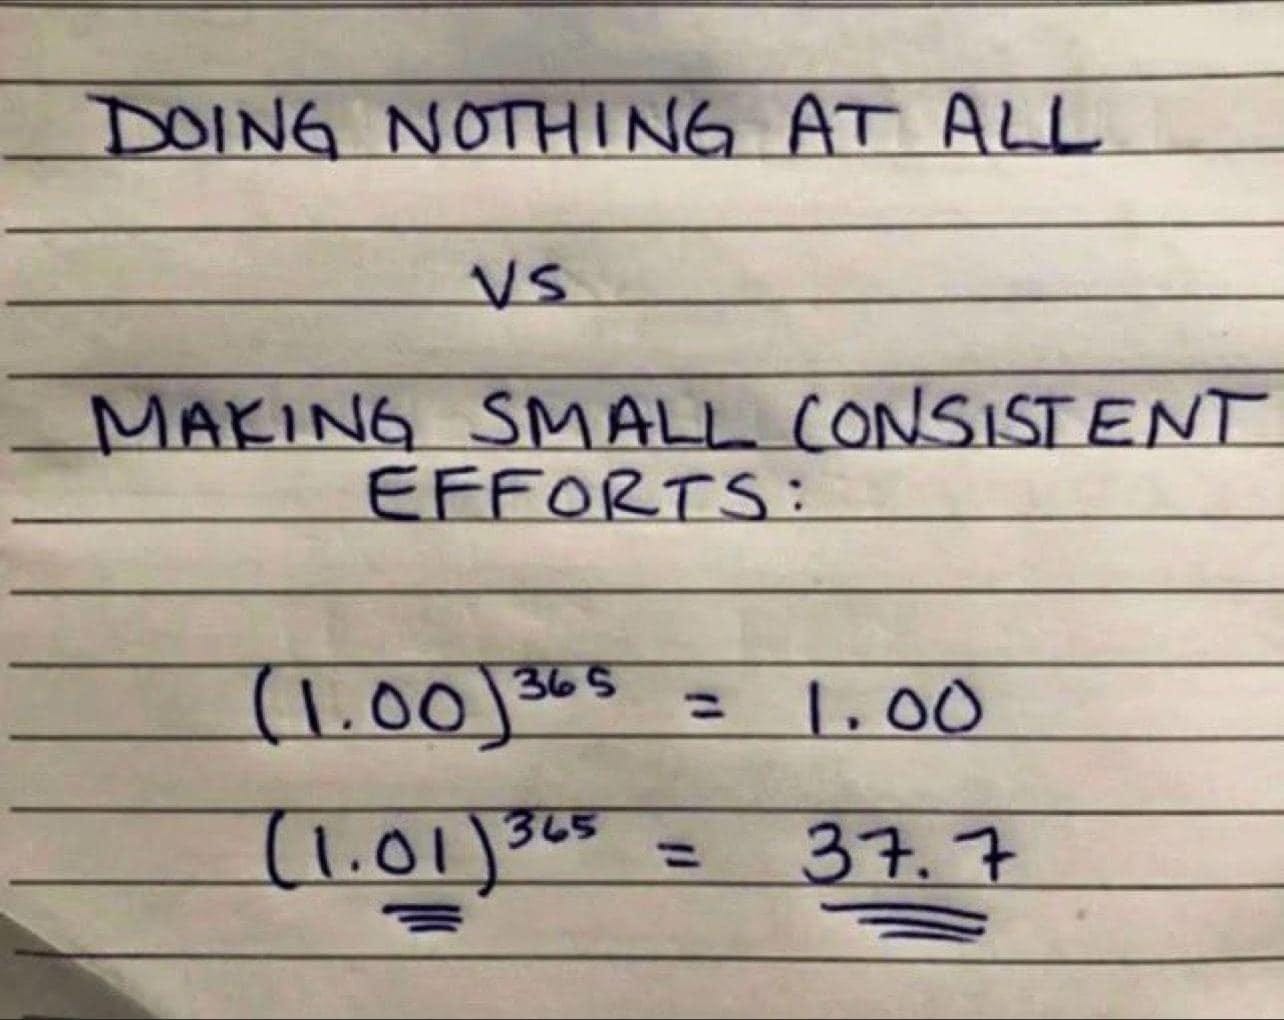 IMG DESCRIPTION: a piece of paper that says, "DOING NOTHING AT ALL VS MAKING SMALL CONSISTENT EFFORTS. (1.00)365 = 1.00 (1.01)365=37.7